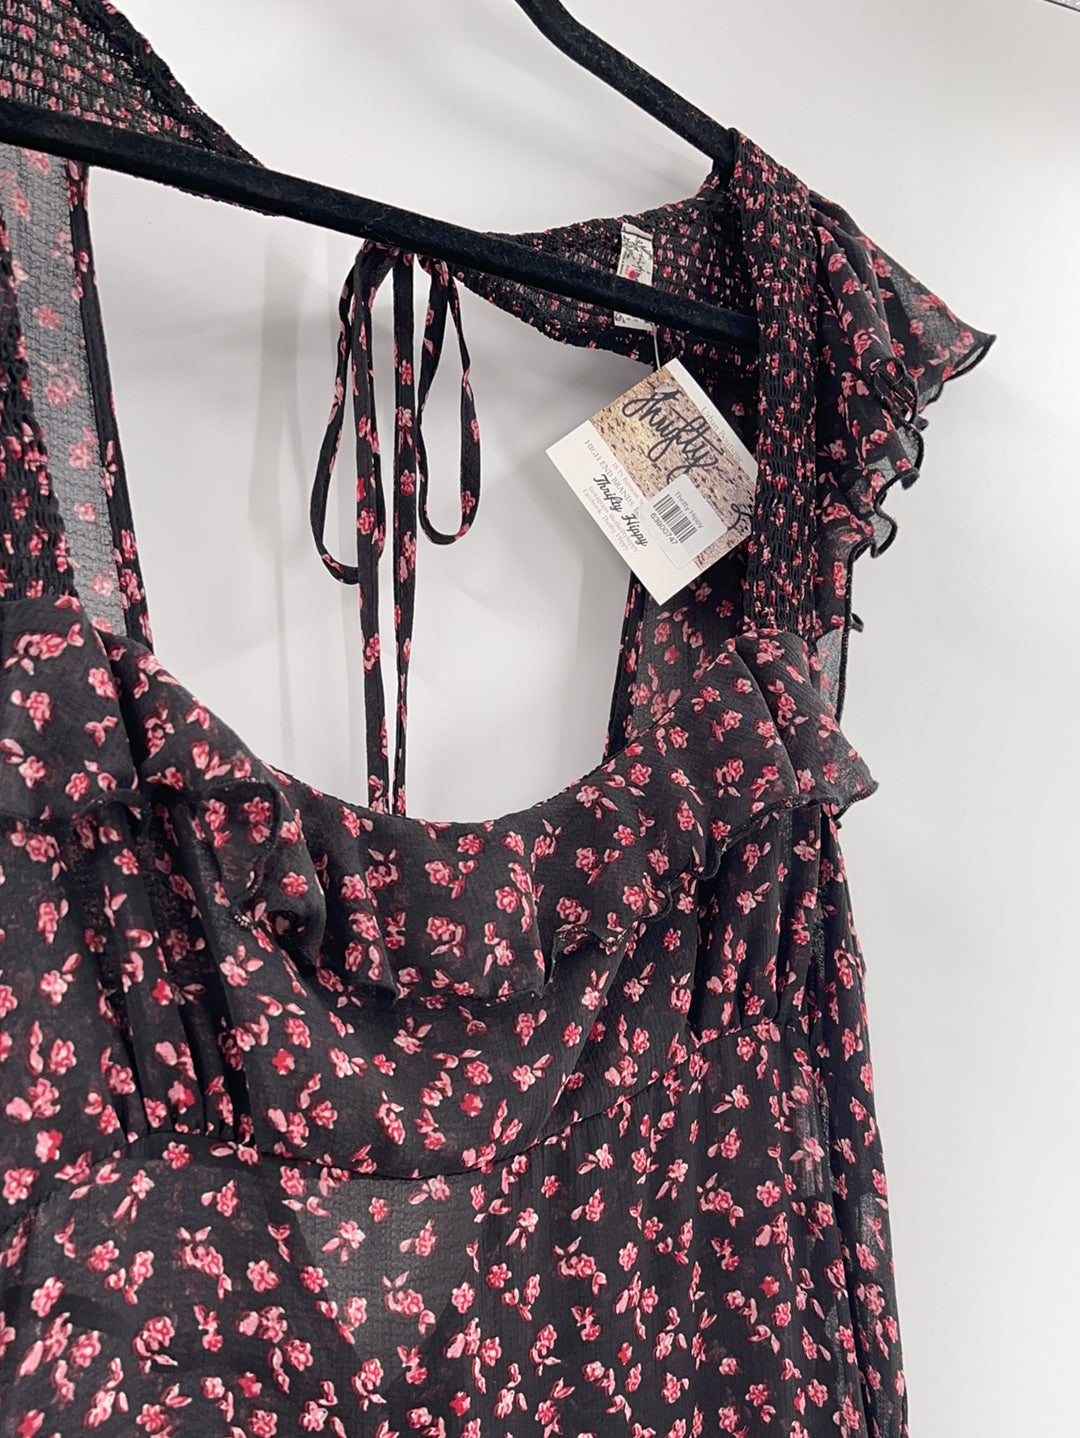 Intimately Free People Floral Maxi (M)